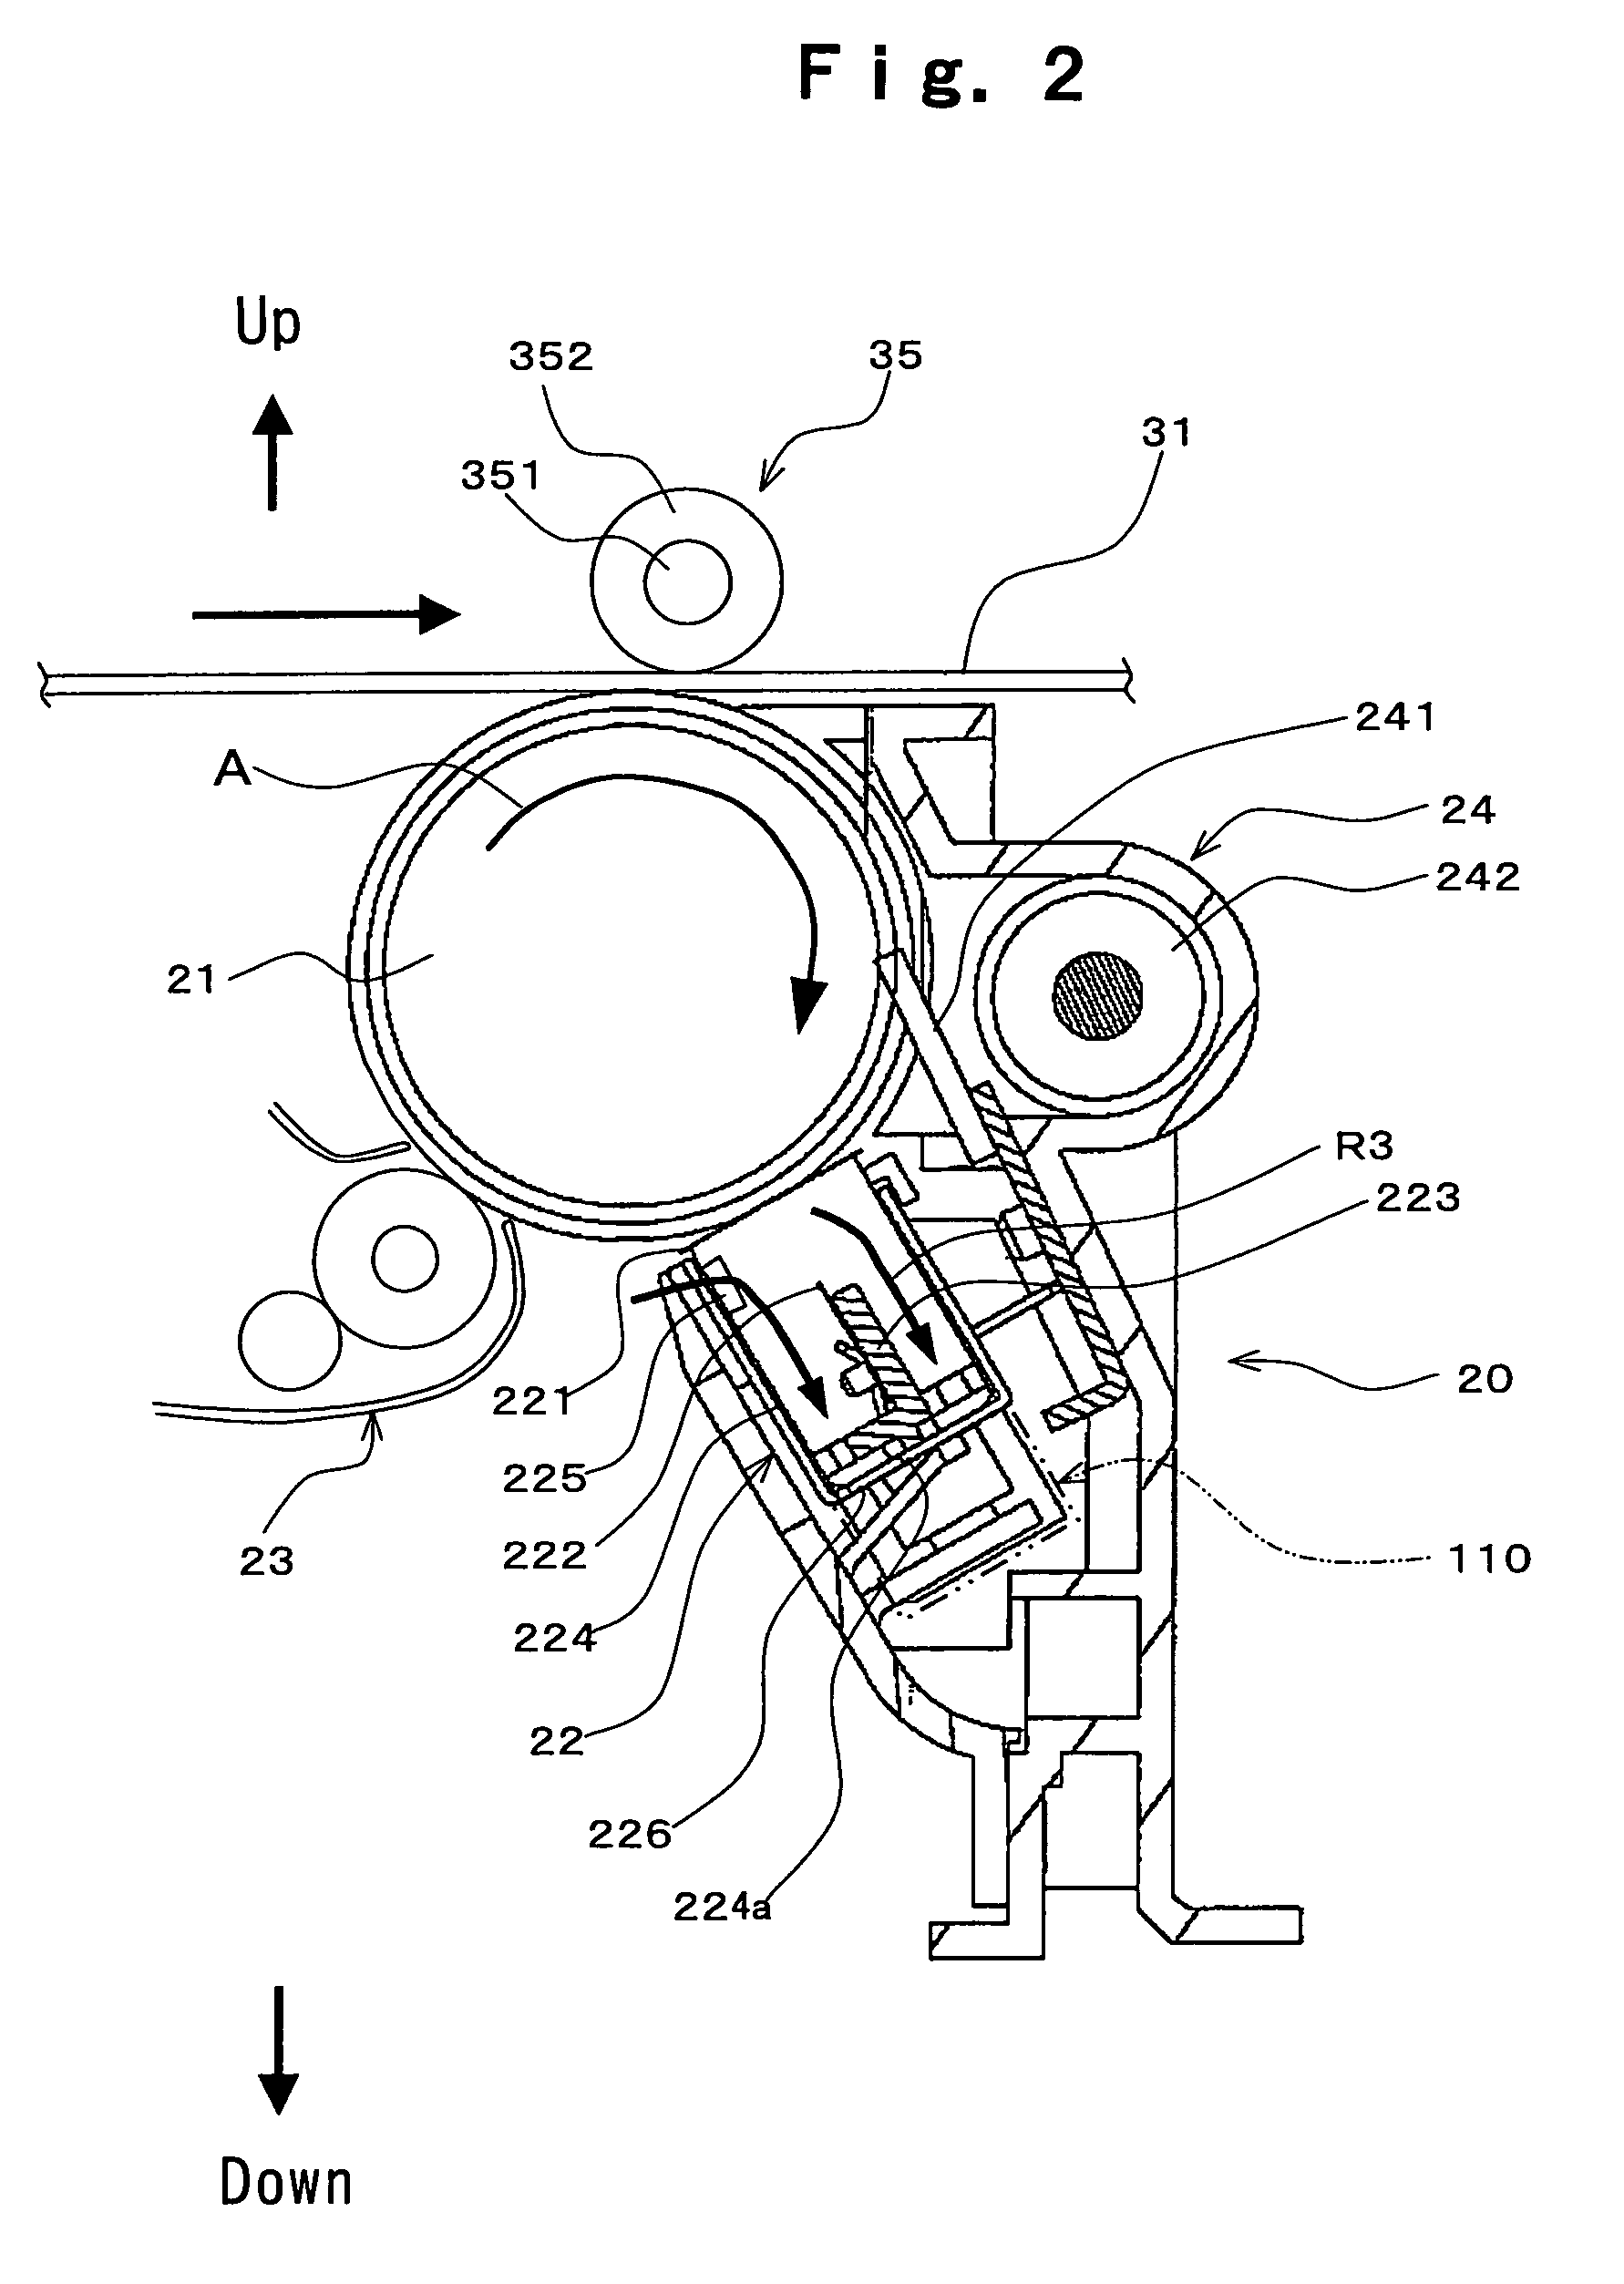 Ozone exhaust system for image forming apparatus